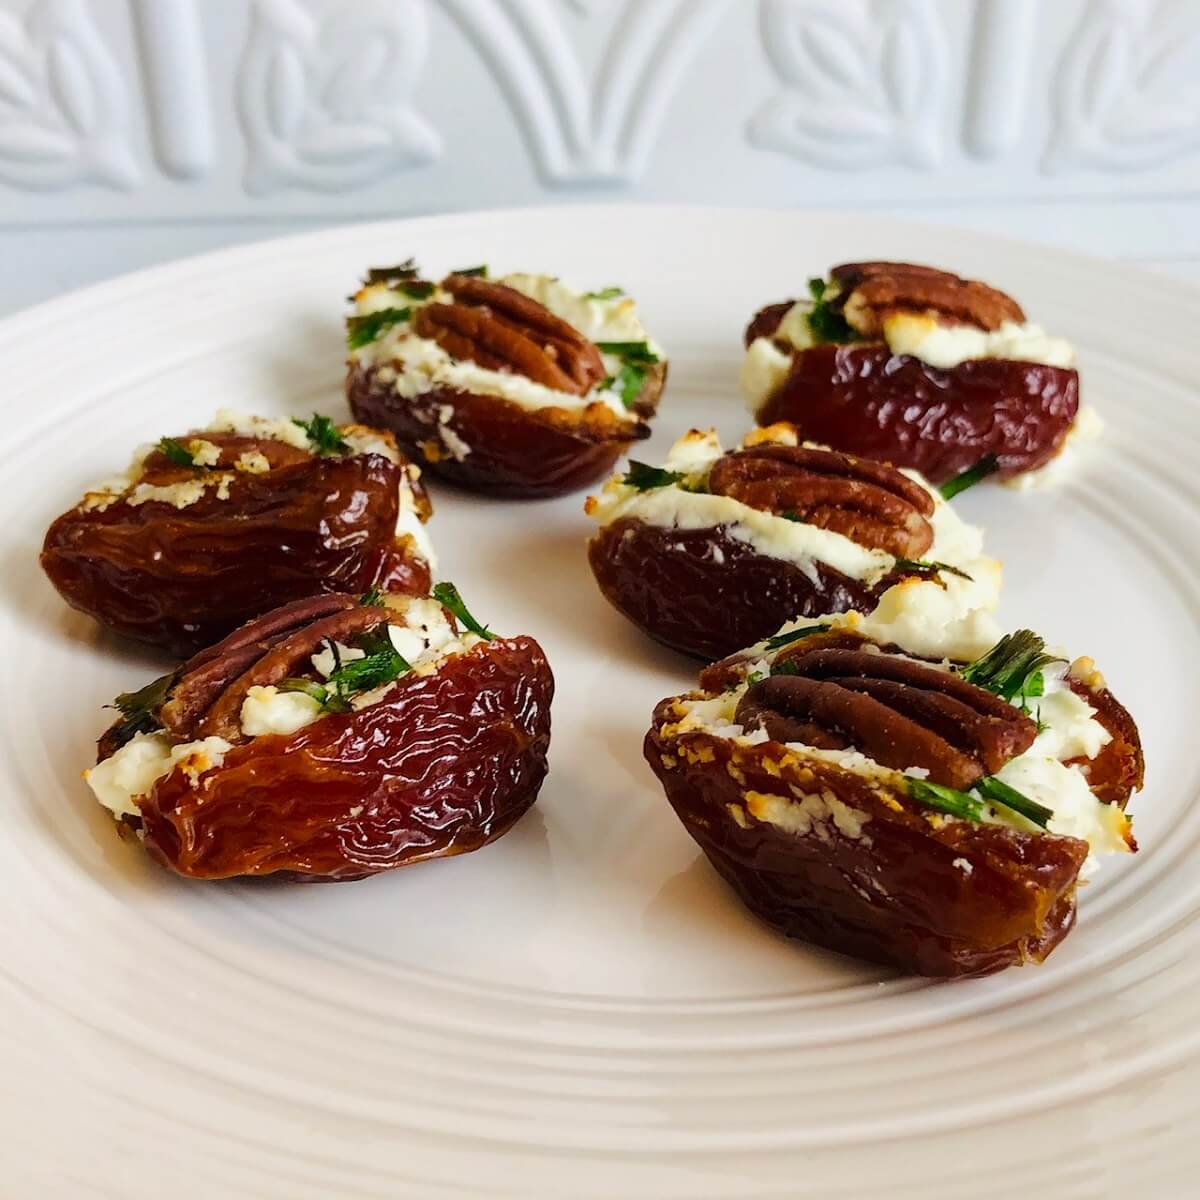 Some goat cheese stuffed dates arranged on a white platter against a white backsplash.